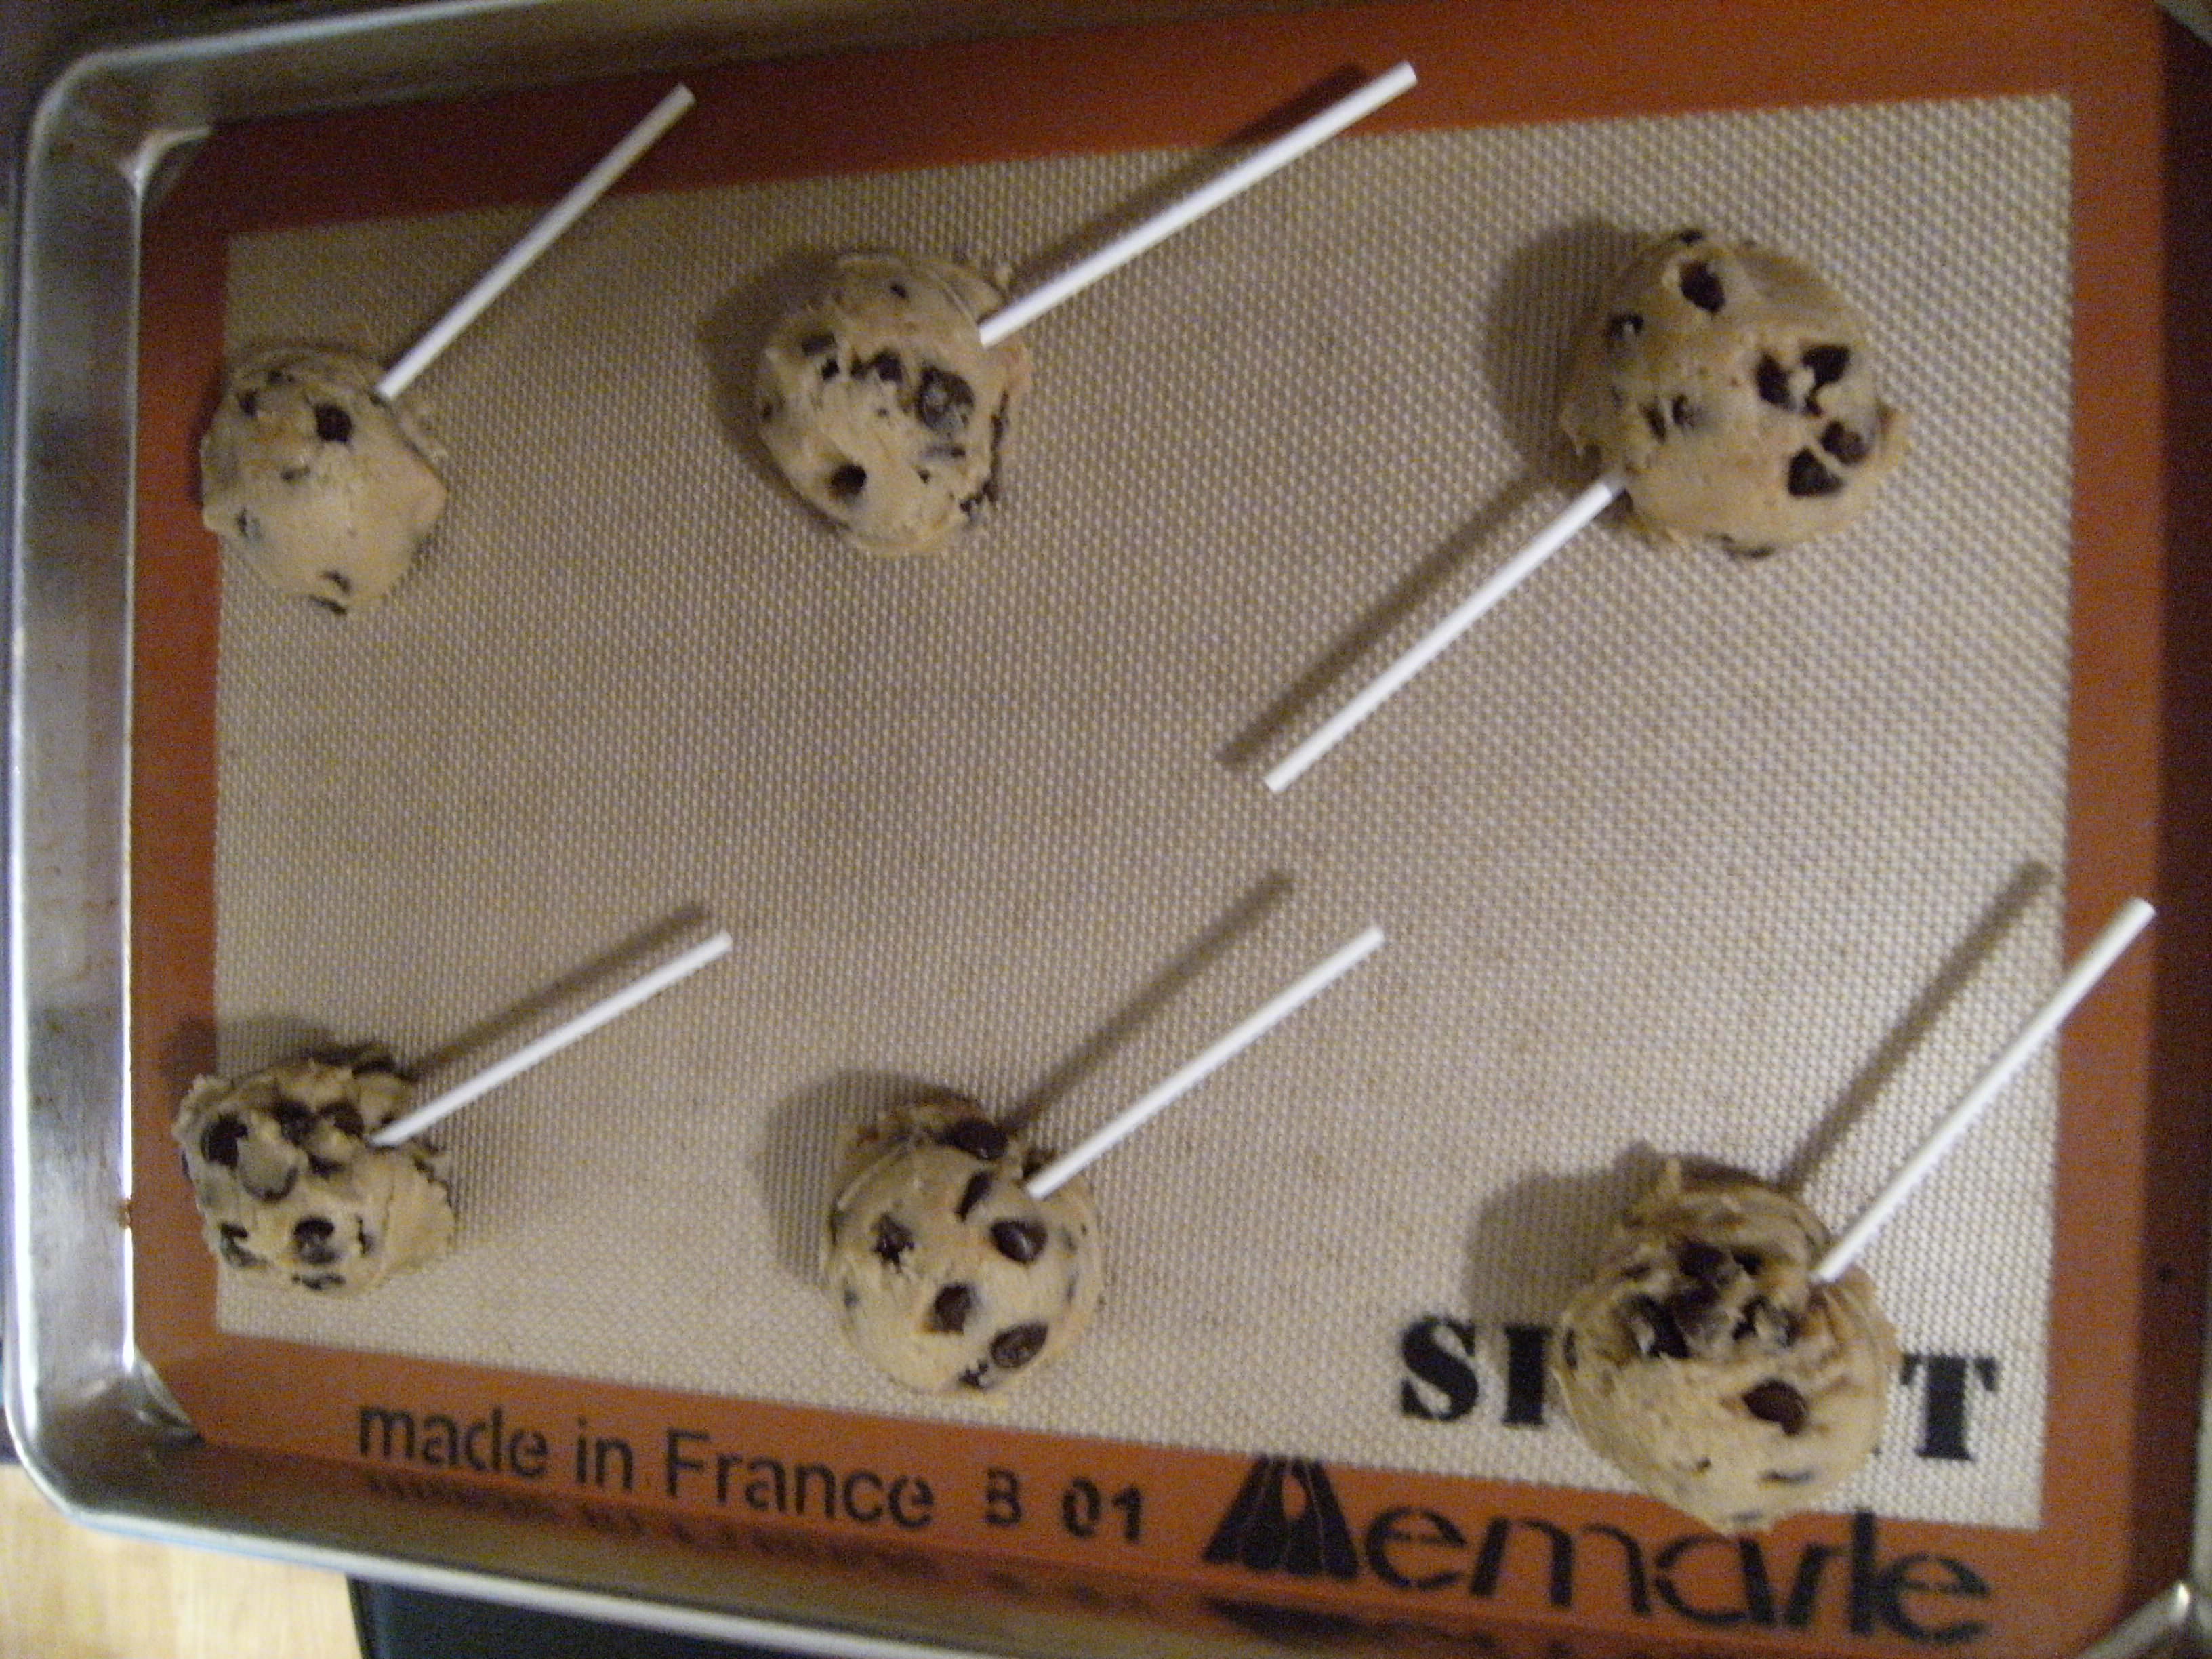 Place lollipop sticks into raw chocolate chip cookie dough and bake them into cookie pops!